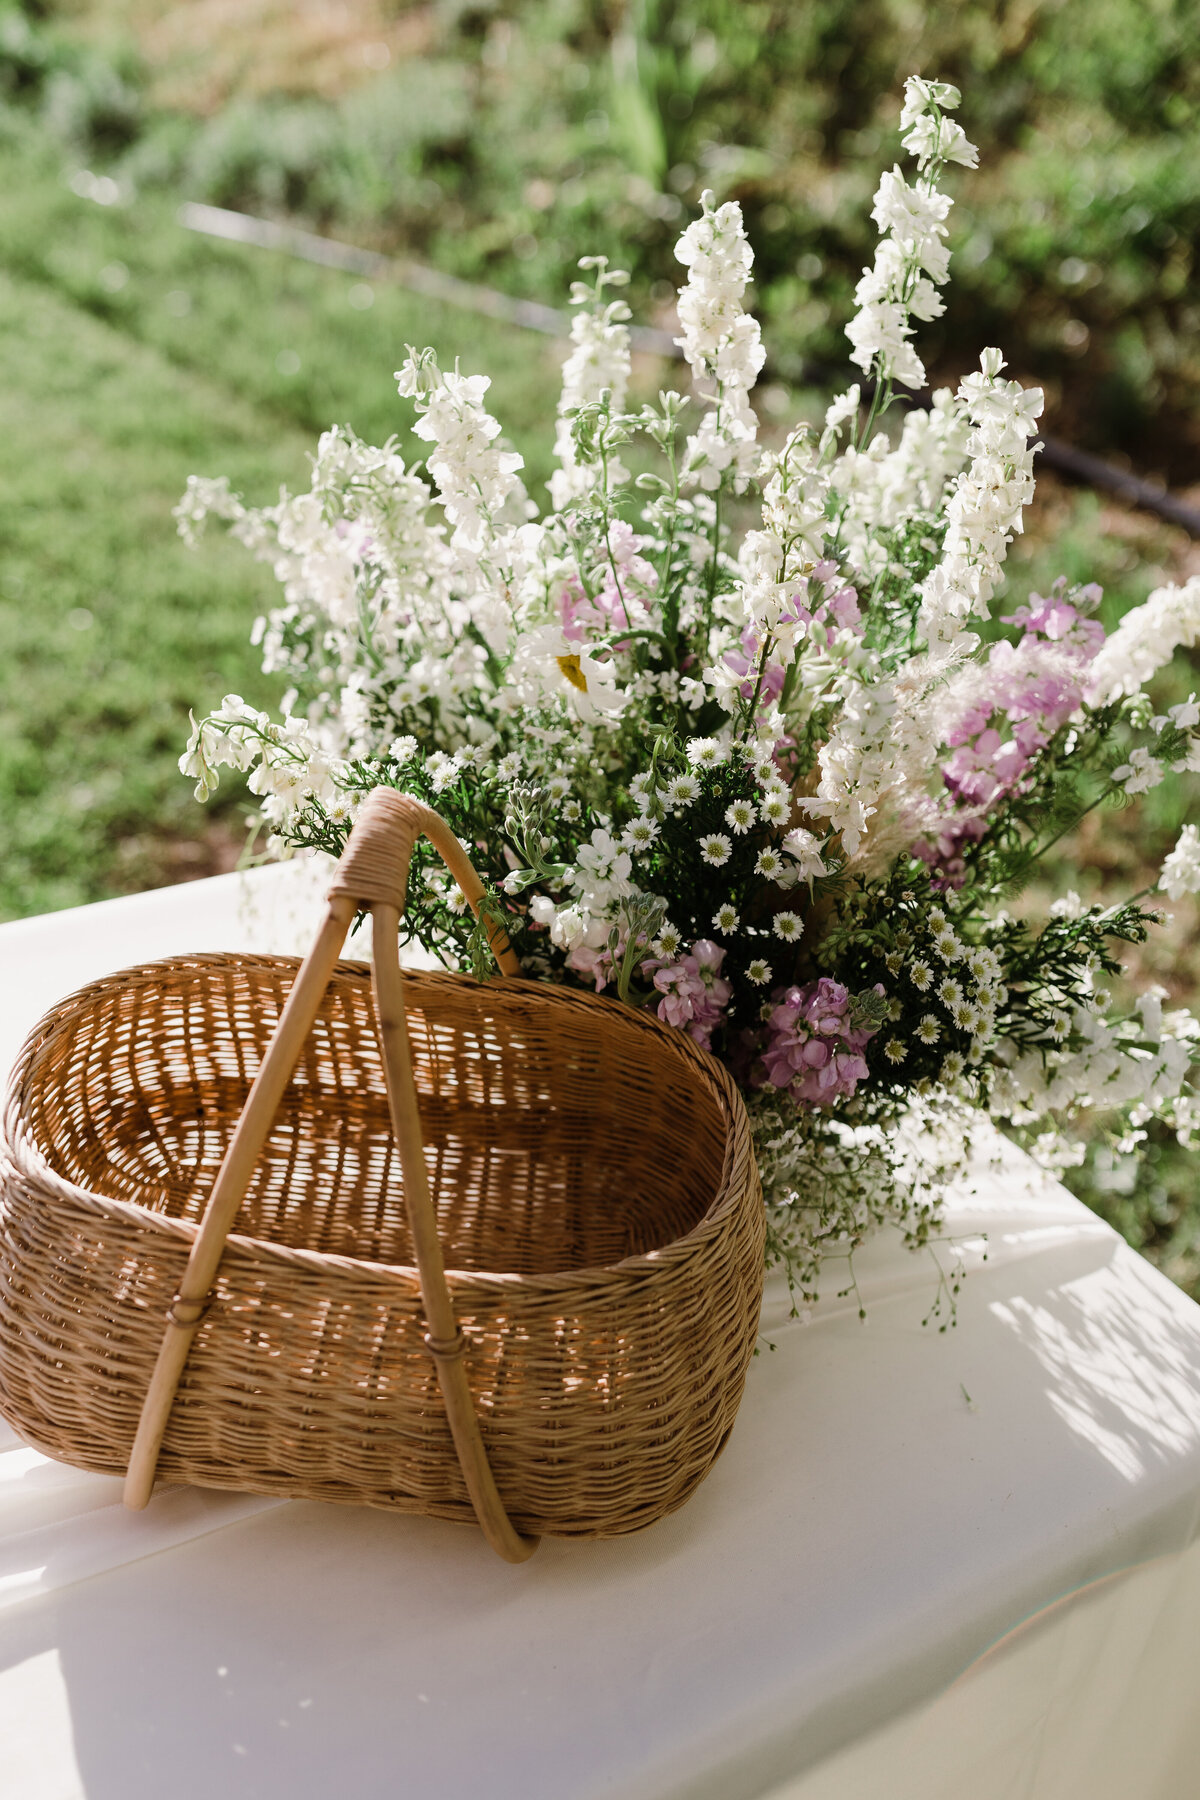 Wicker basket and white and purple florals at Dallenbach Ranch Colorado Wedding